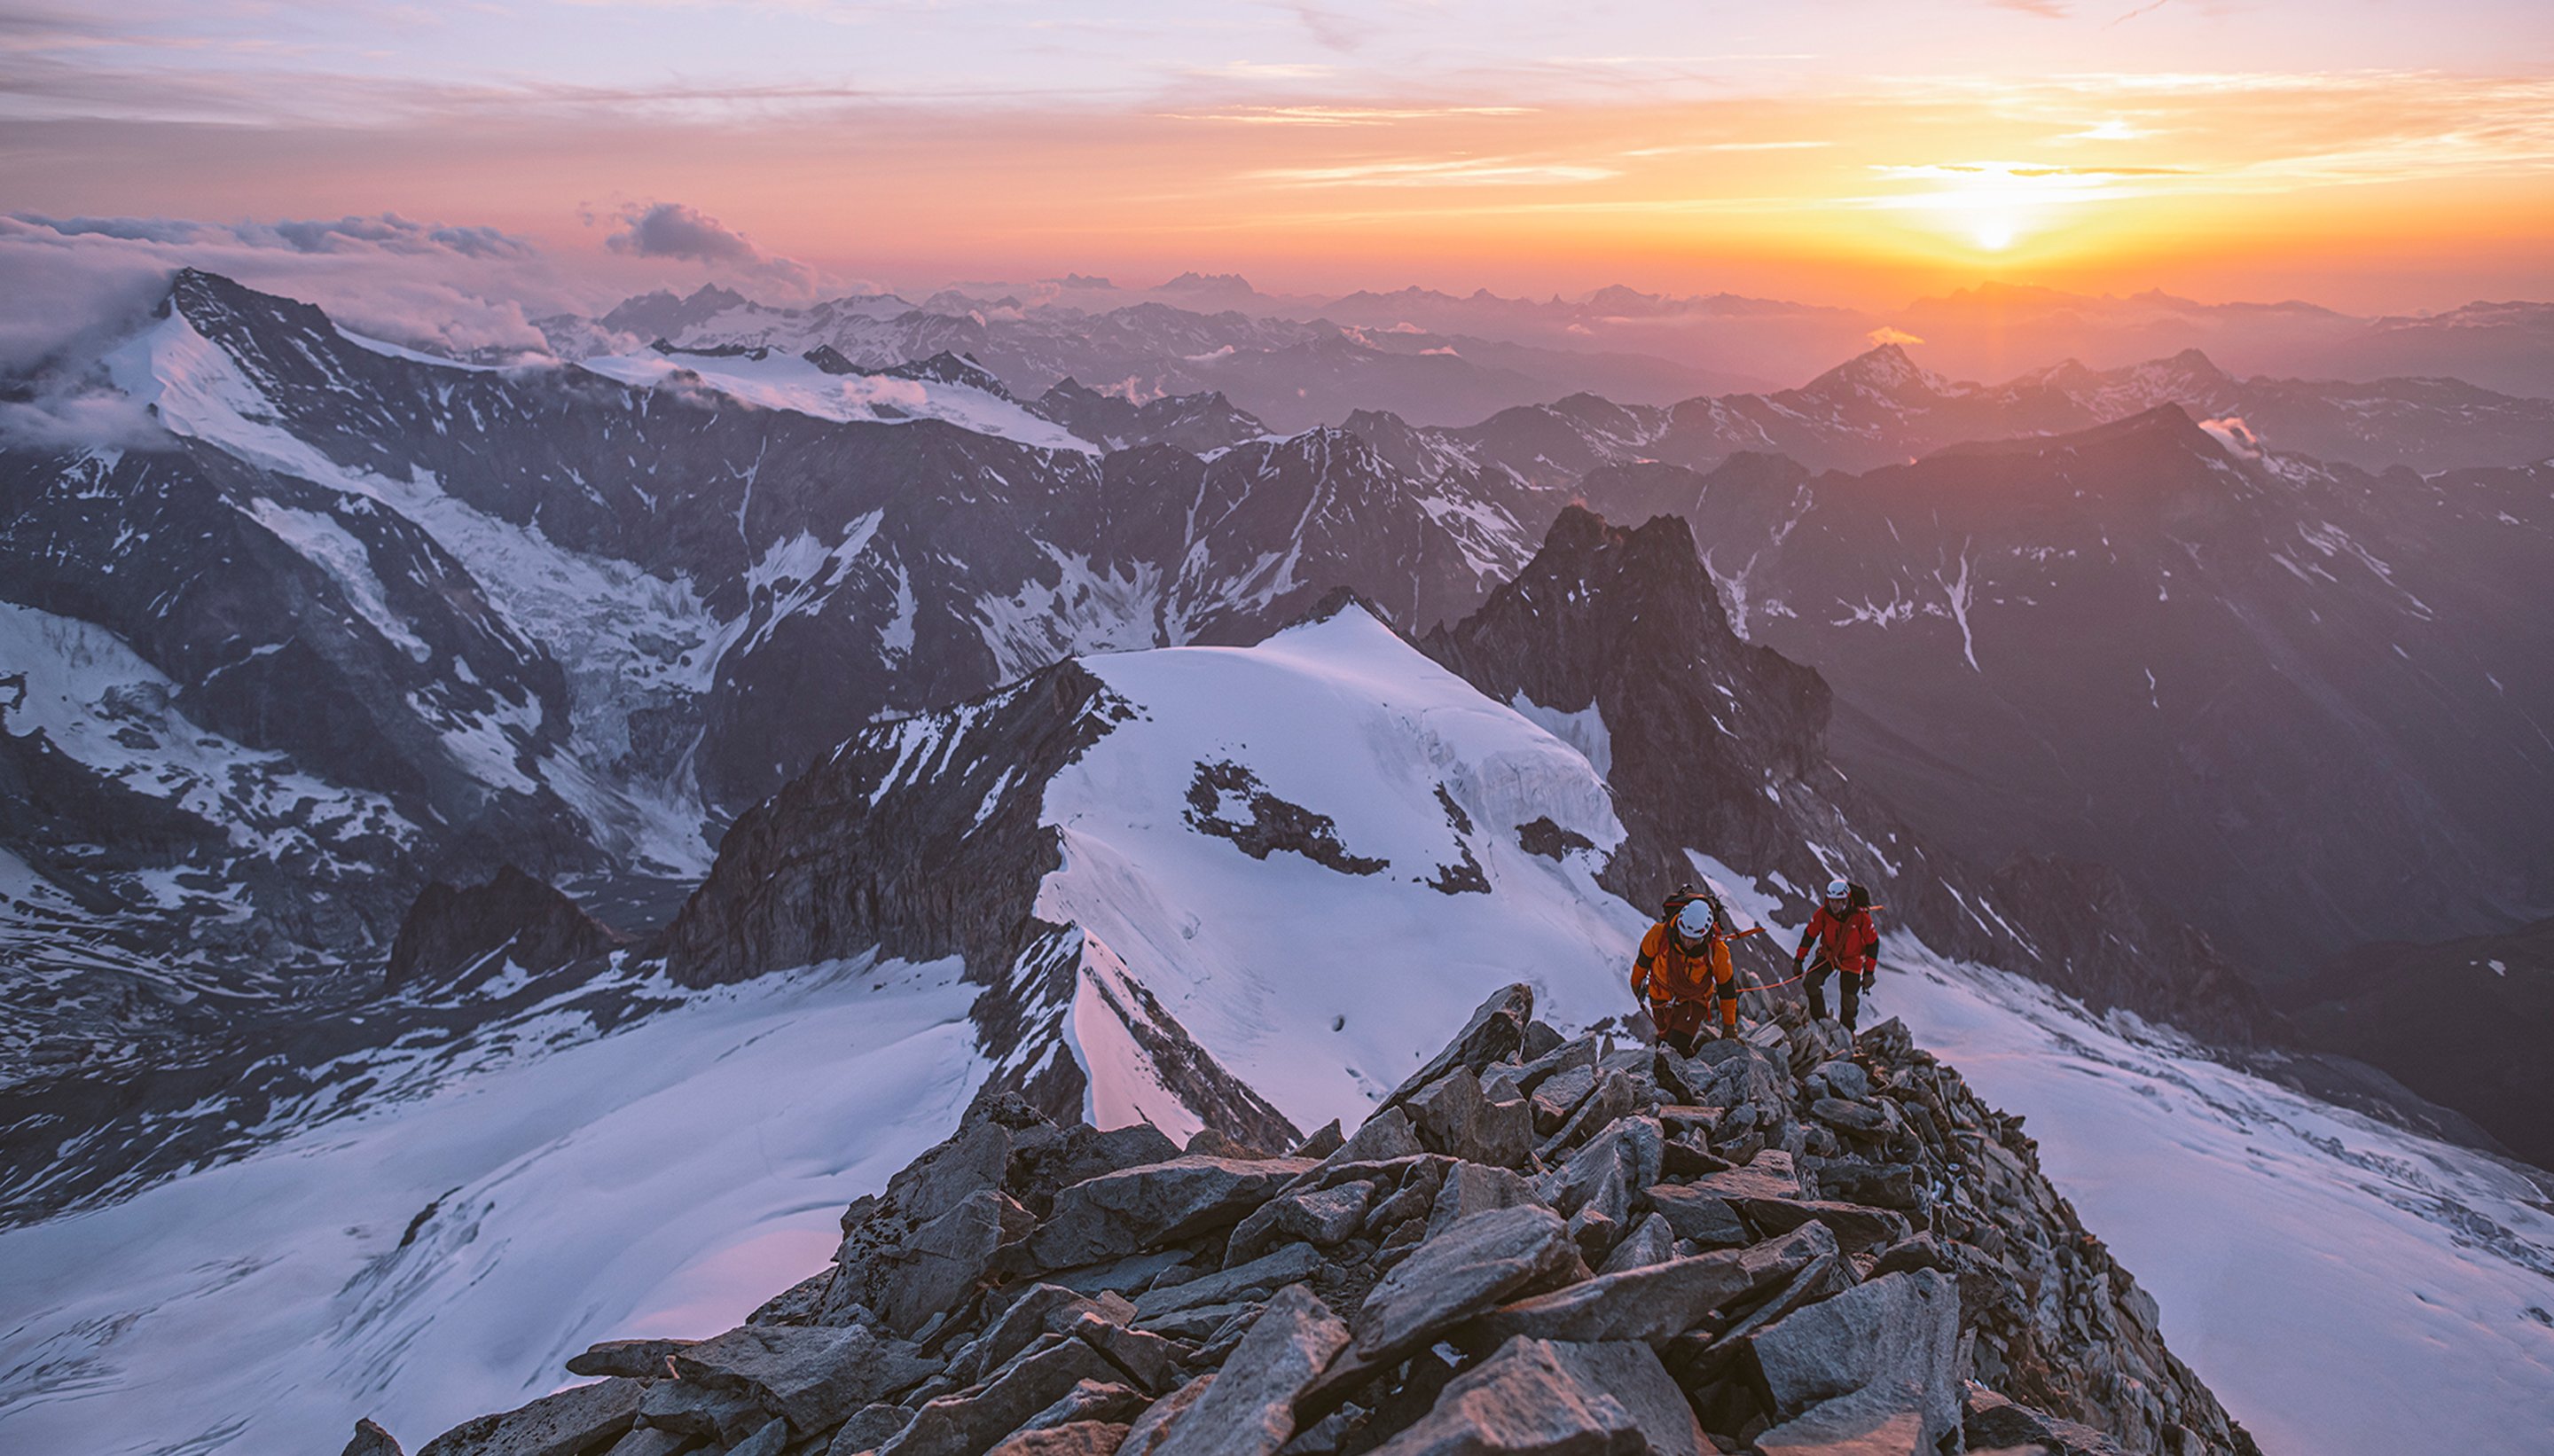 In the remote alpine, athletes scale a snowy peak at magic hour.